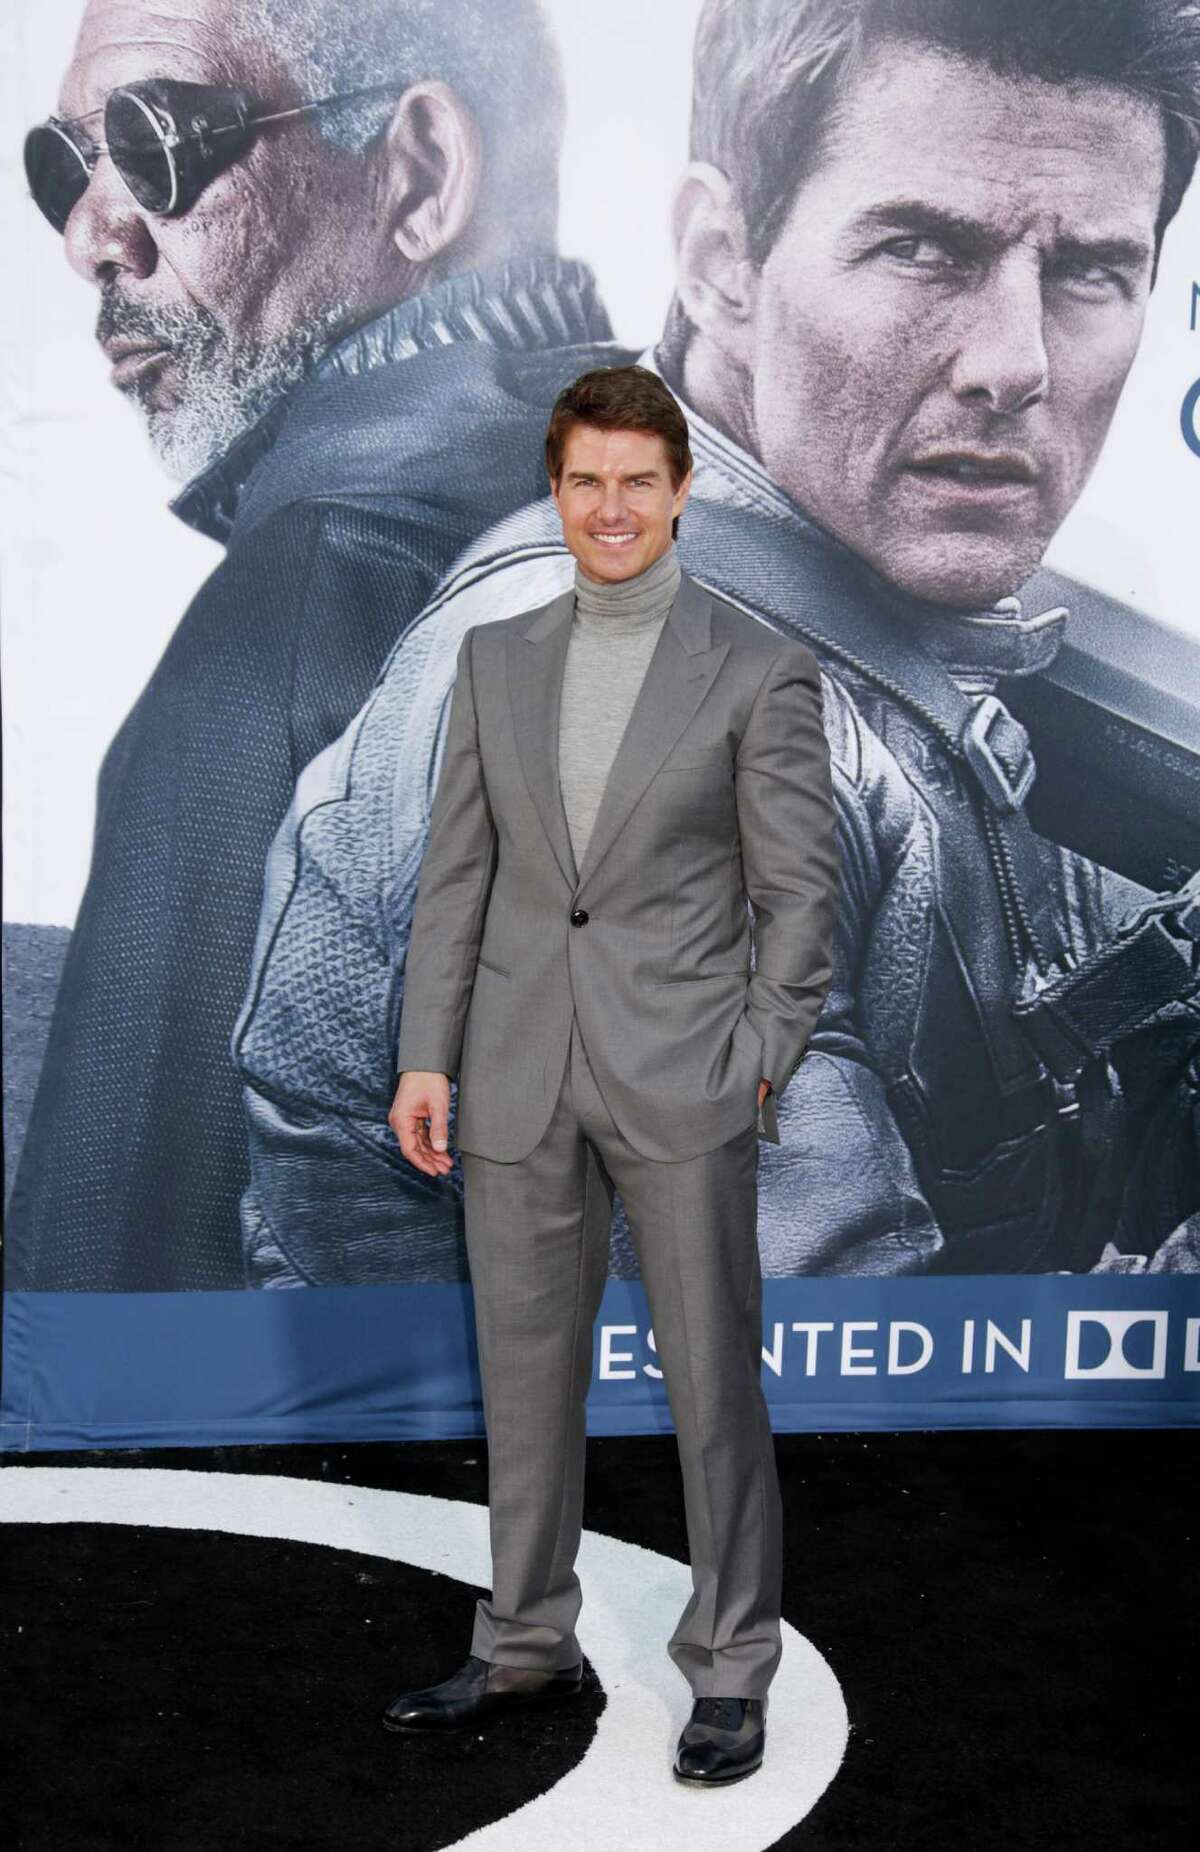 Tom Cruise arrives at the LA premiere of "Oblivion" at the TCL Chinese Theater on Wednesday, April 10, 2013 in Los Angeles. (Photo by Todd Williamson/Invision/AP)